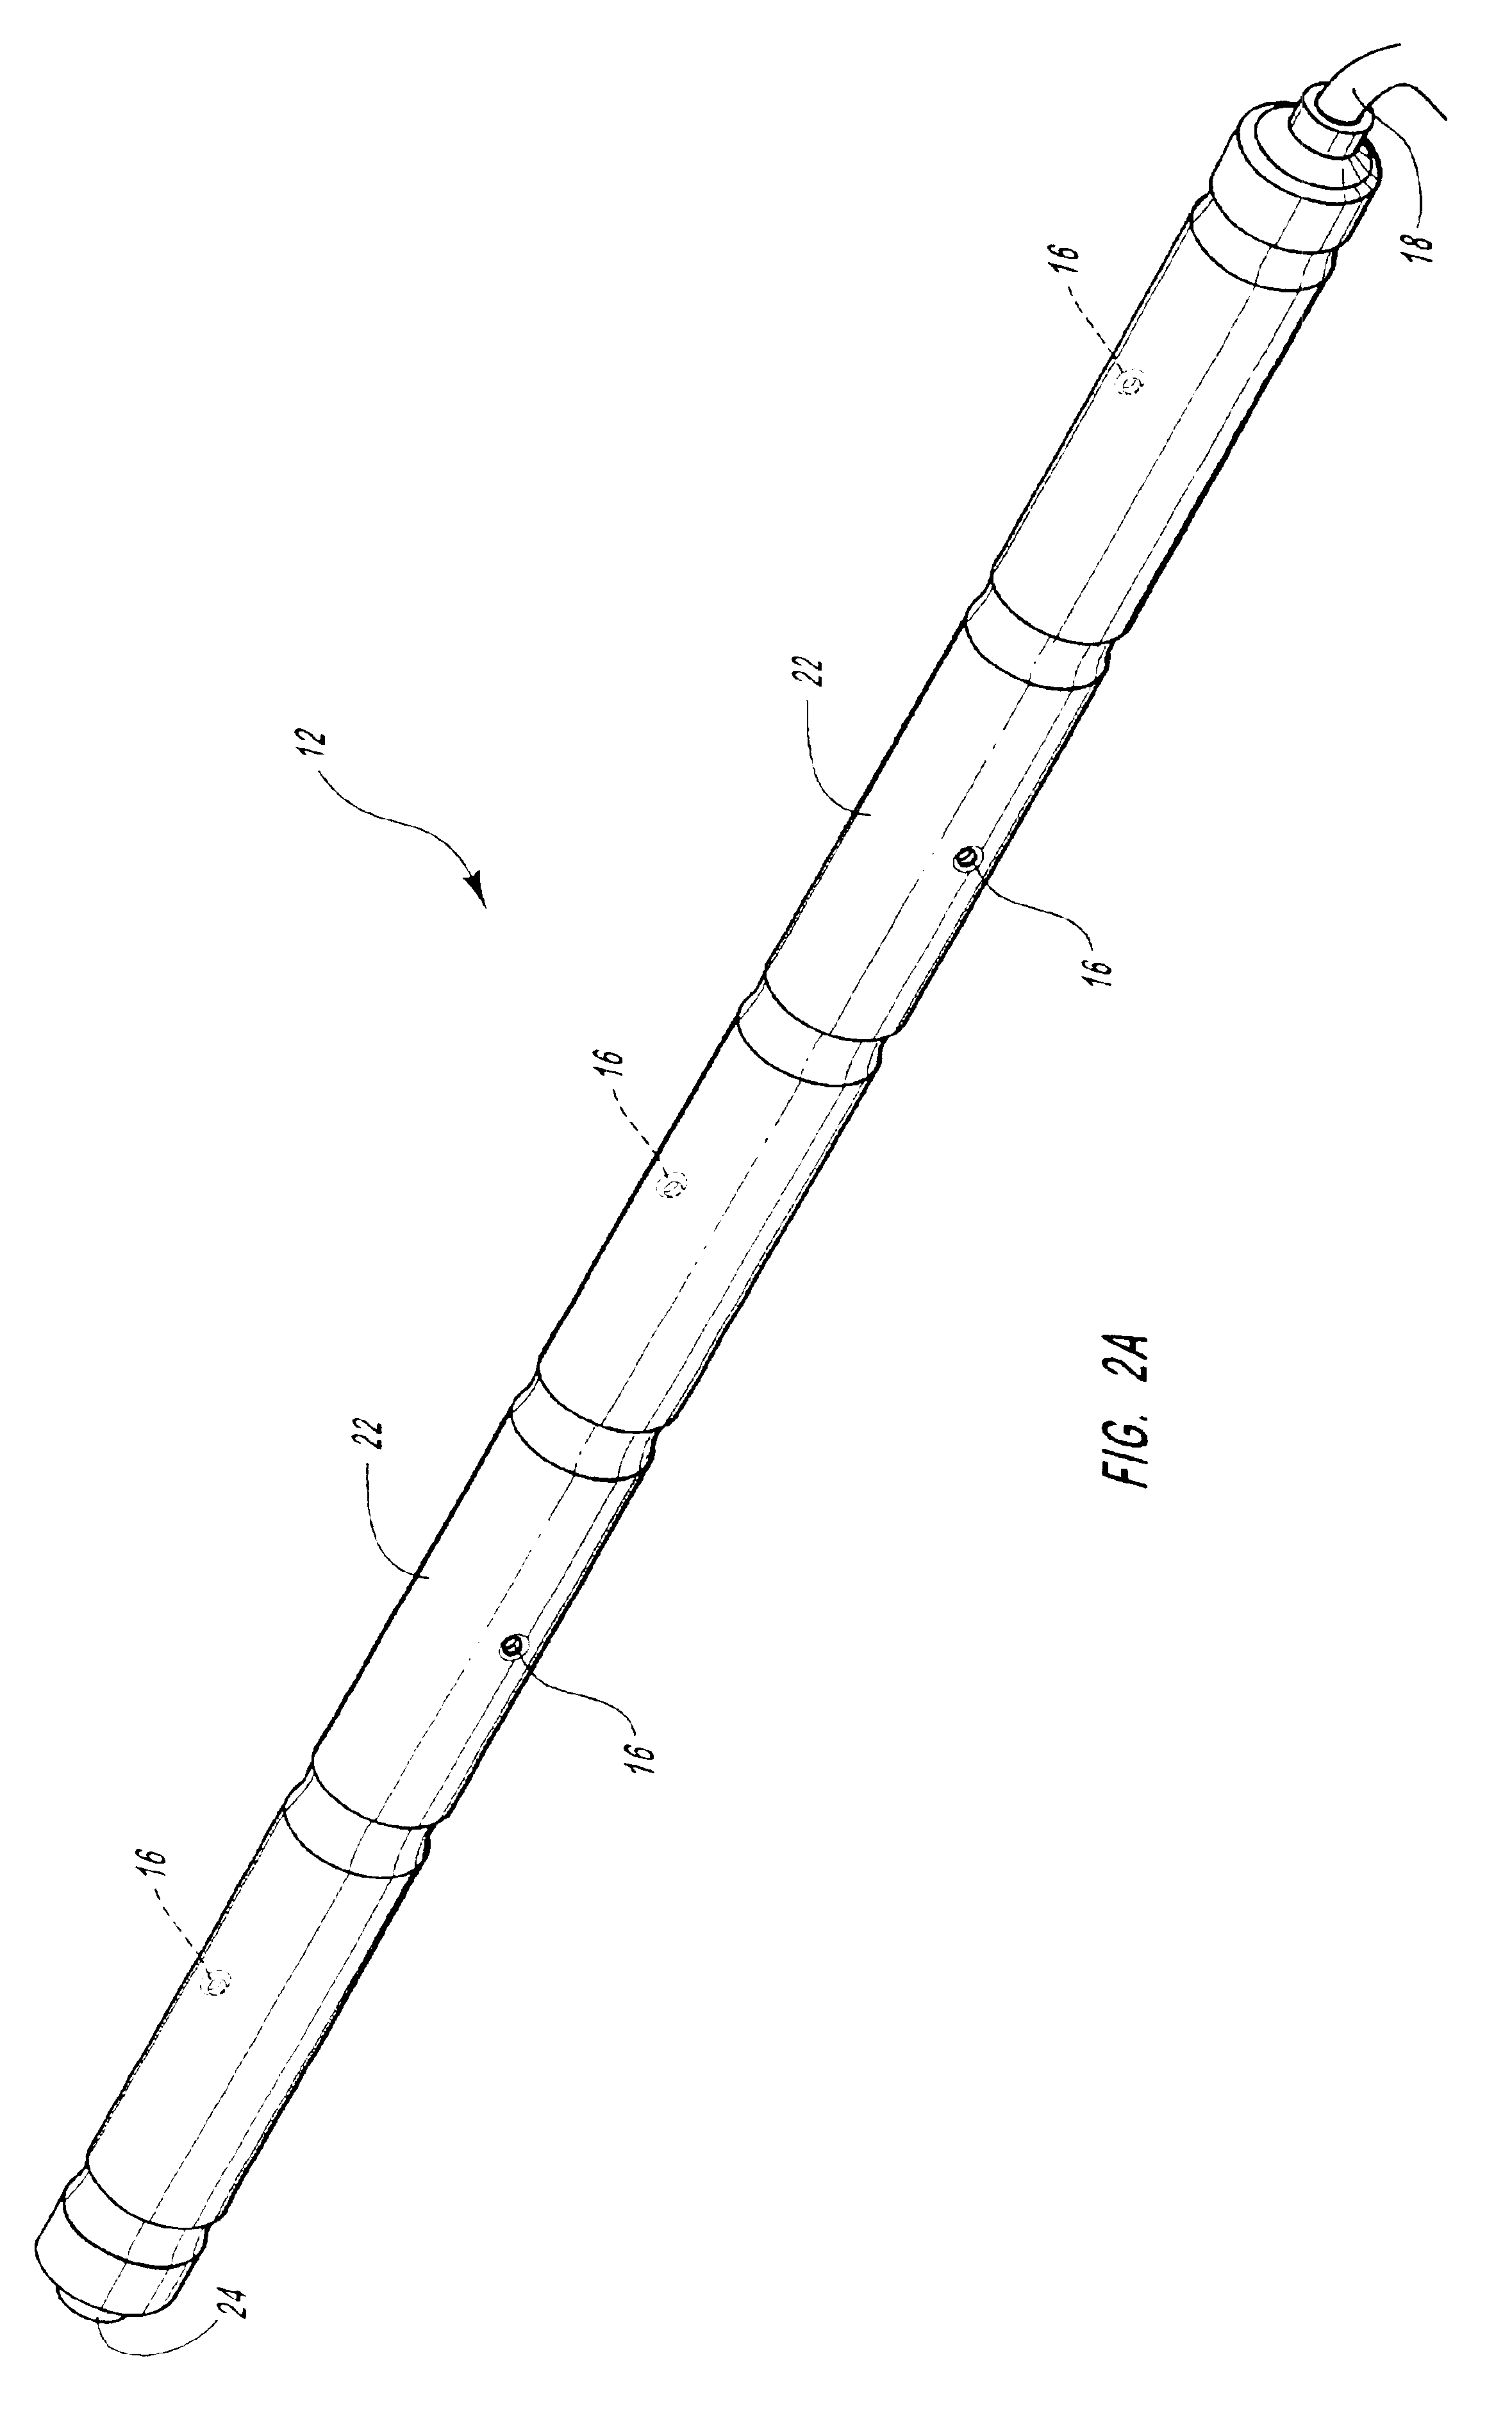 Airbag inflator diffuser system and method of manufacture